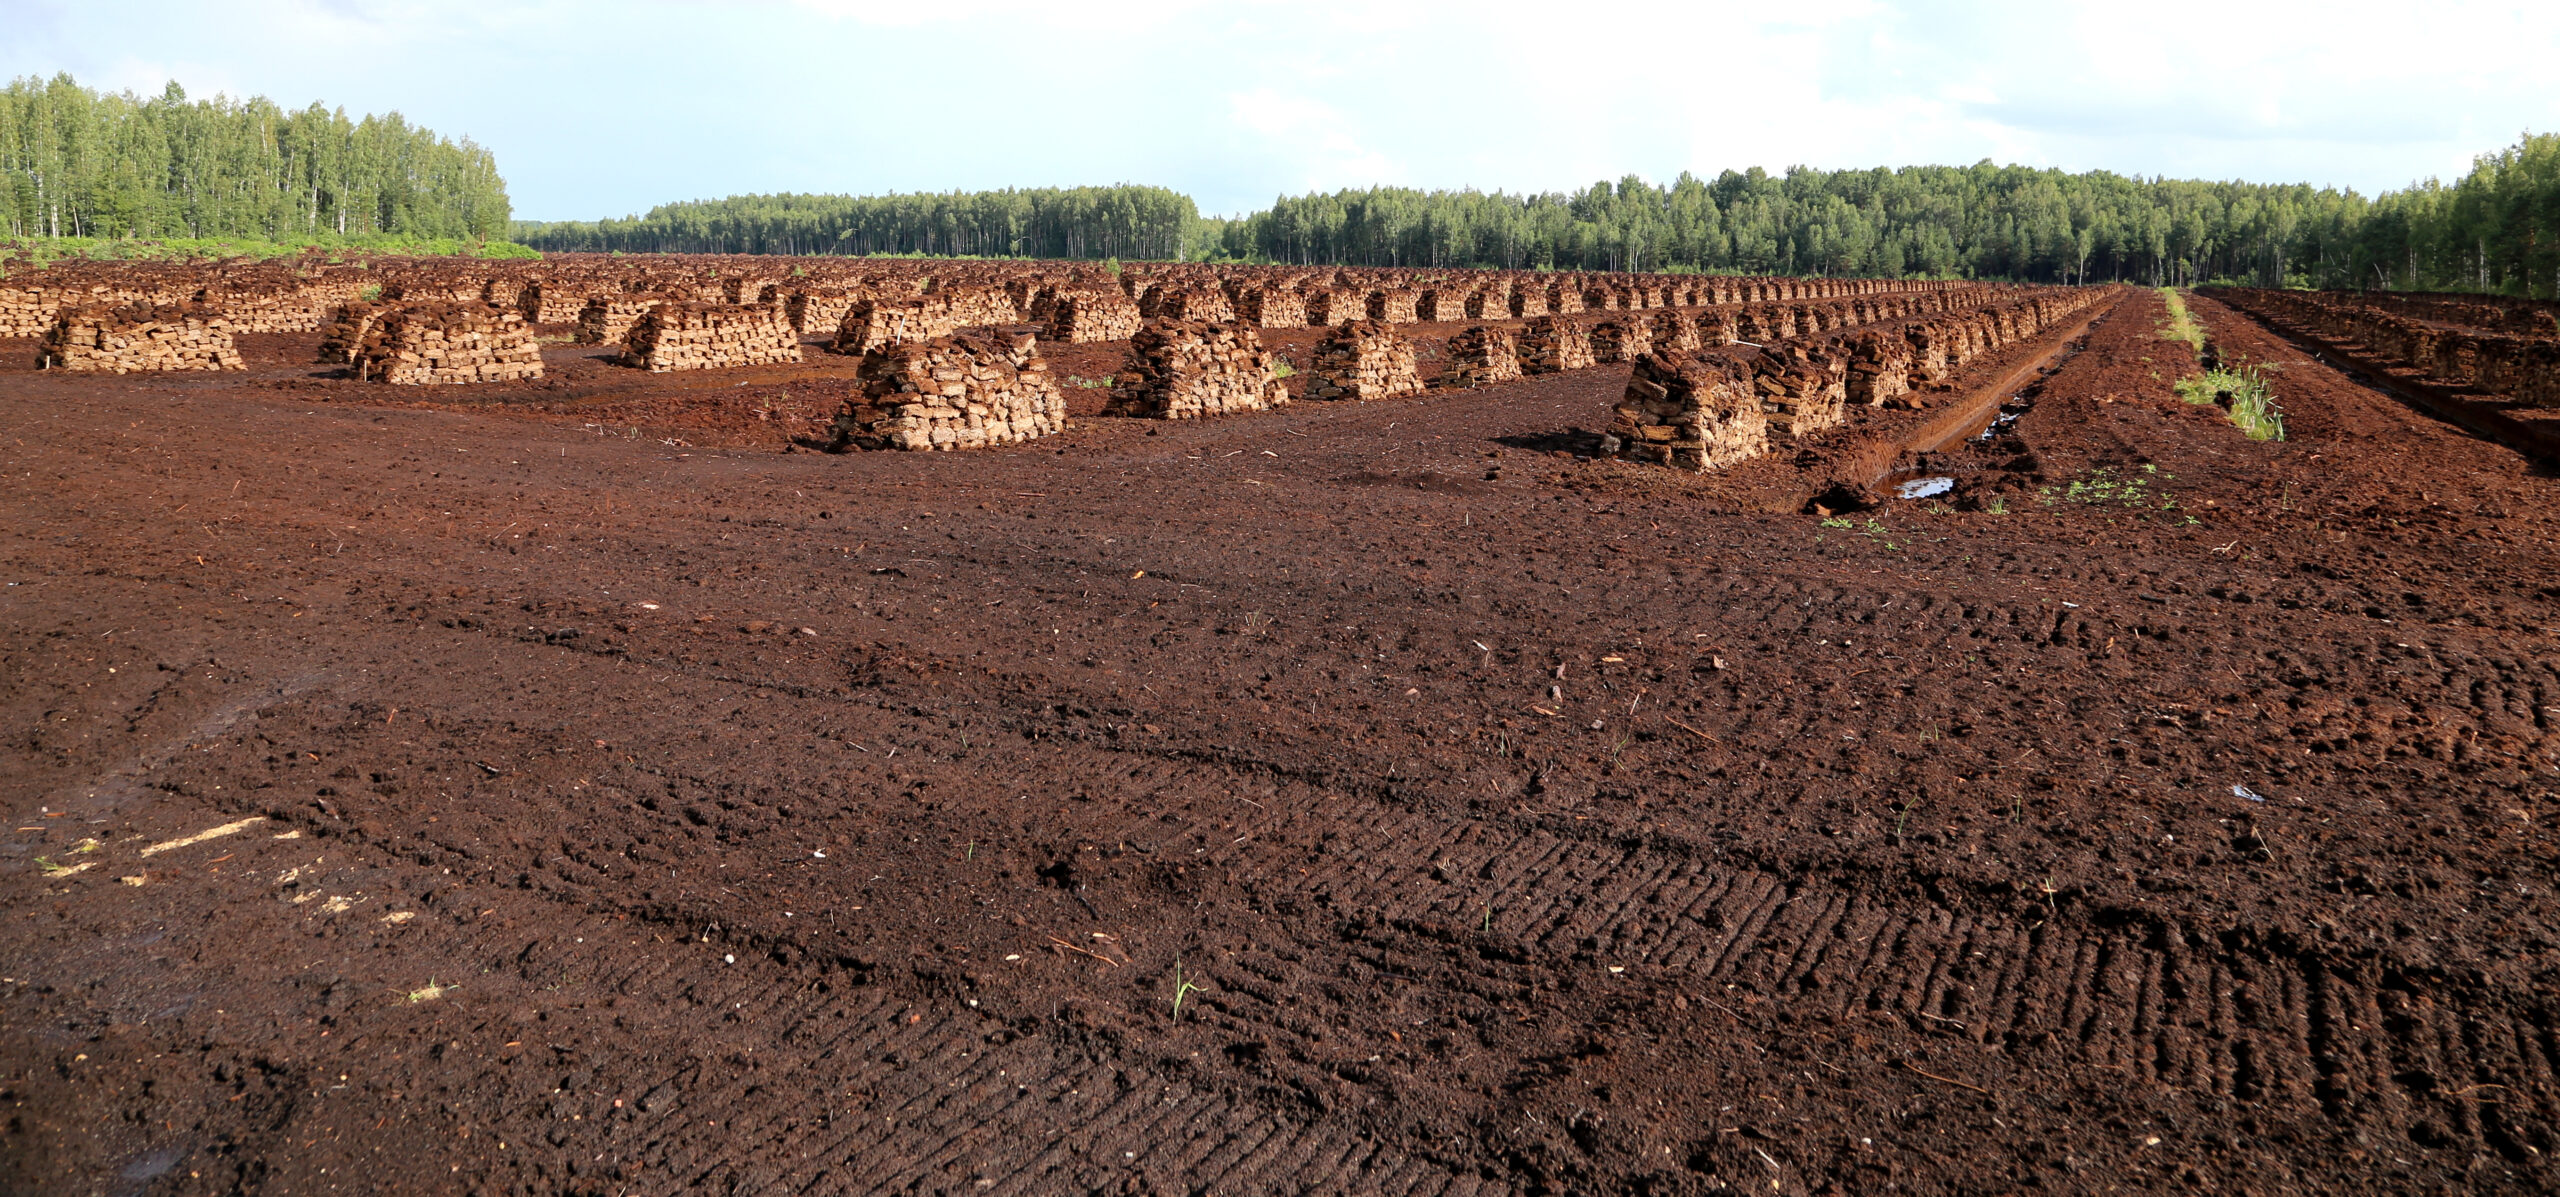 Peat field, soil with piles of peat in rows, green bushes and blue sky in the background